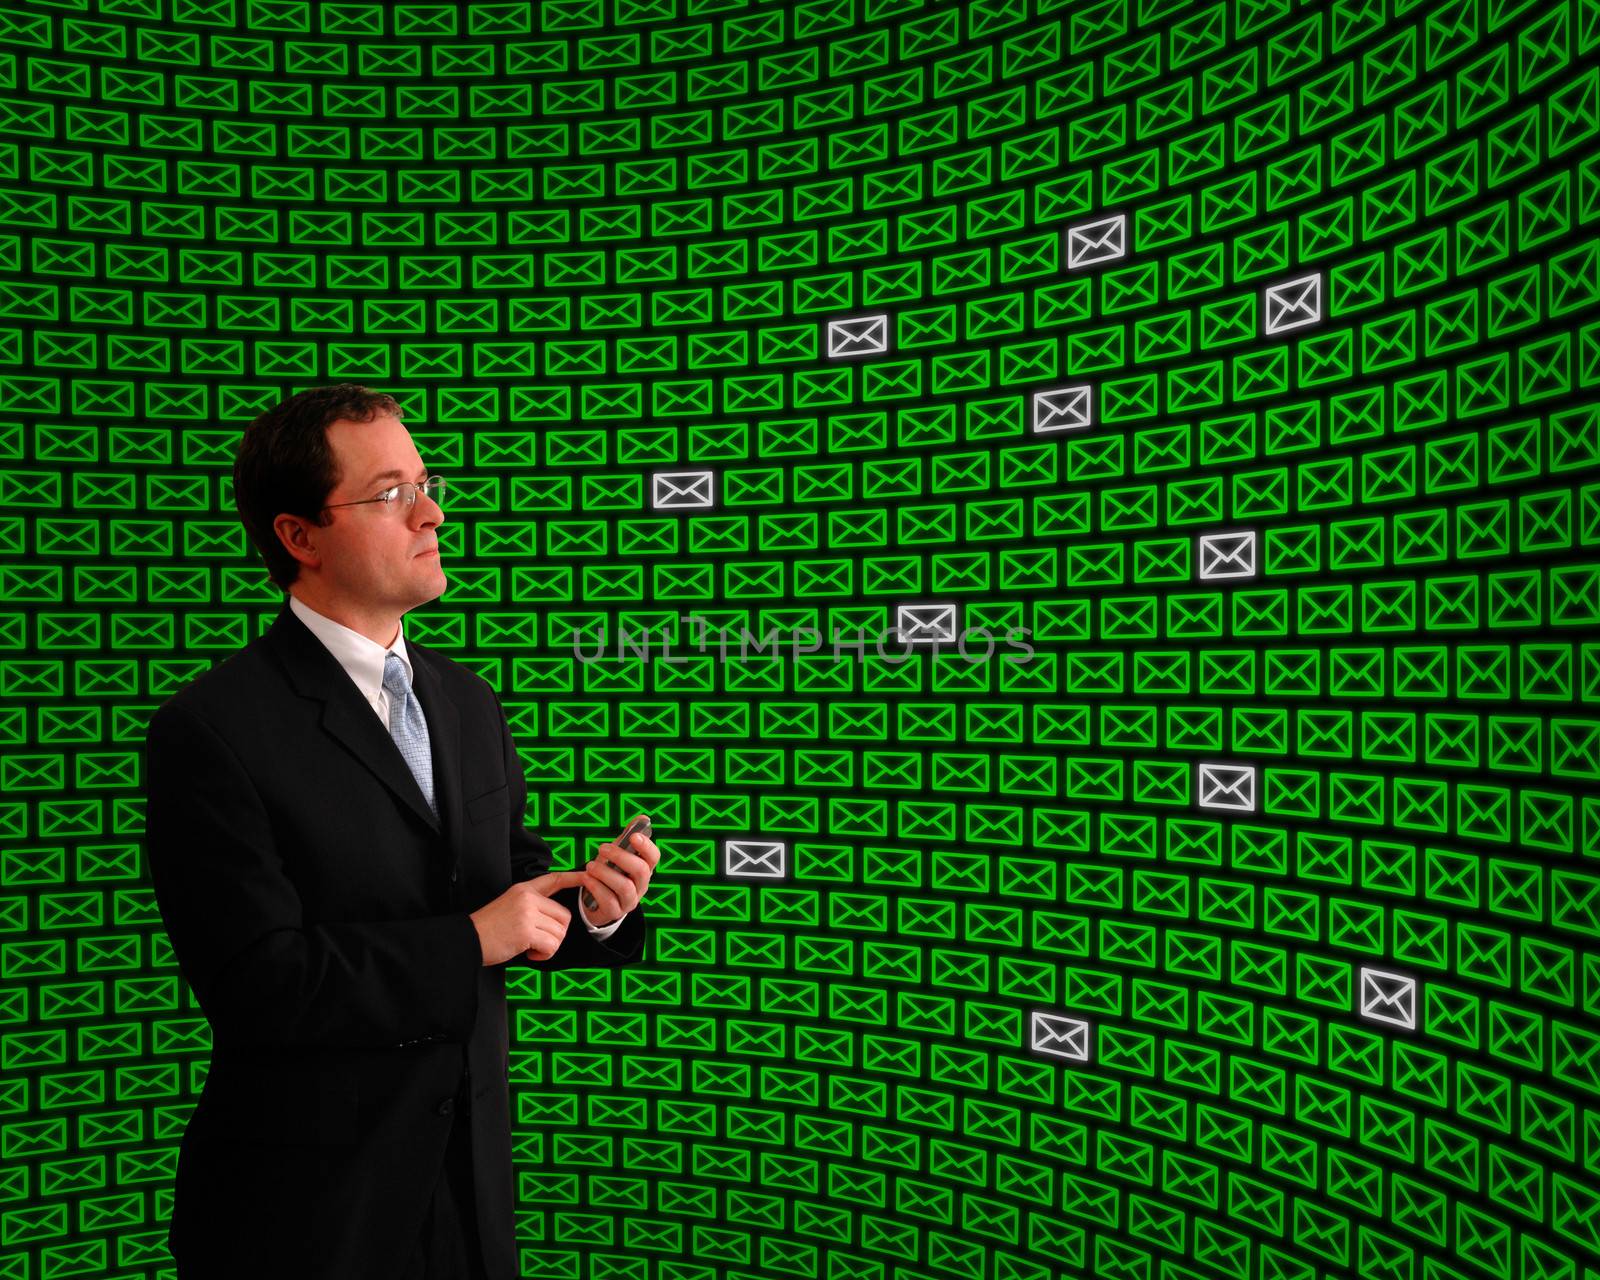 Man monitoring an array of email icon by Balefire9